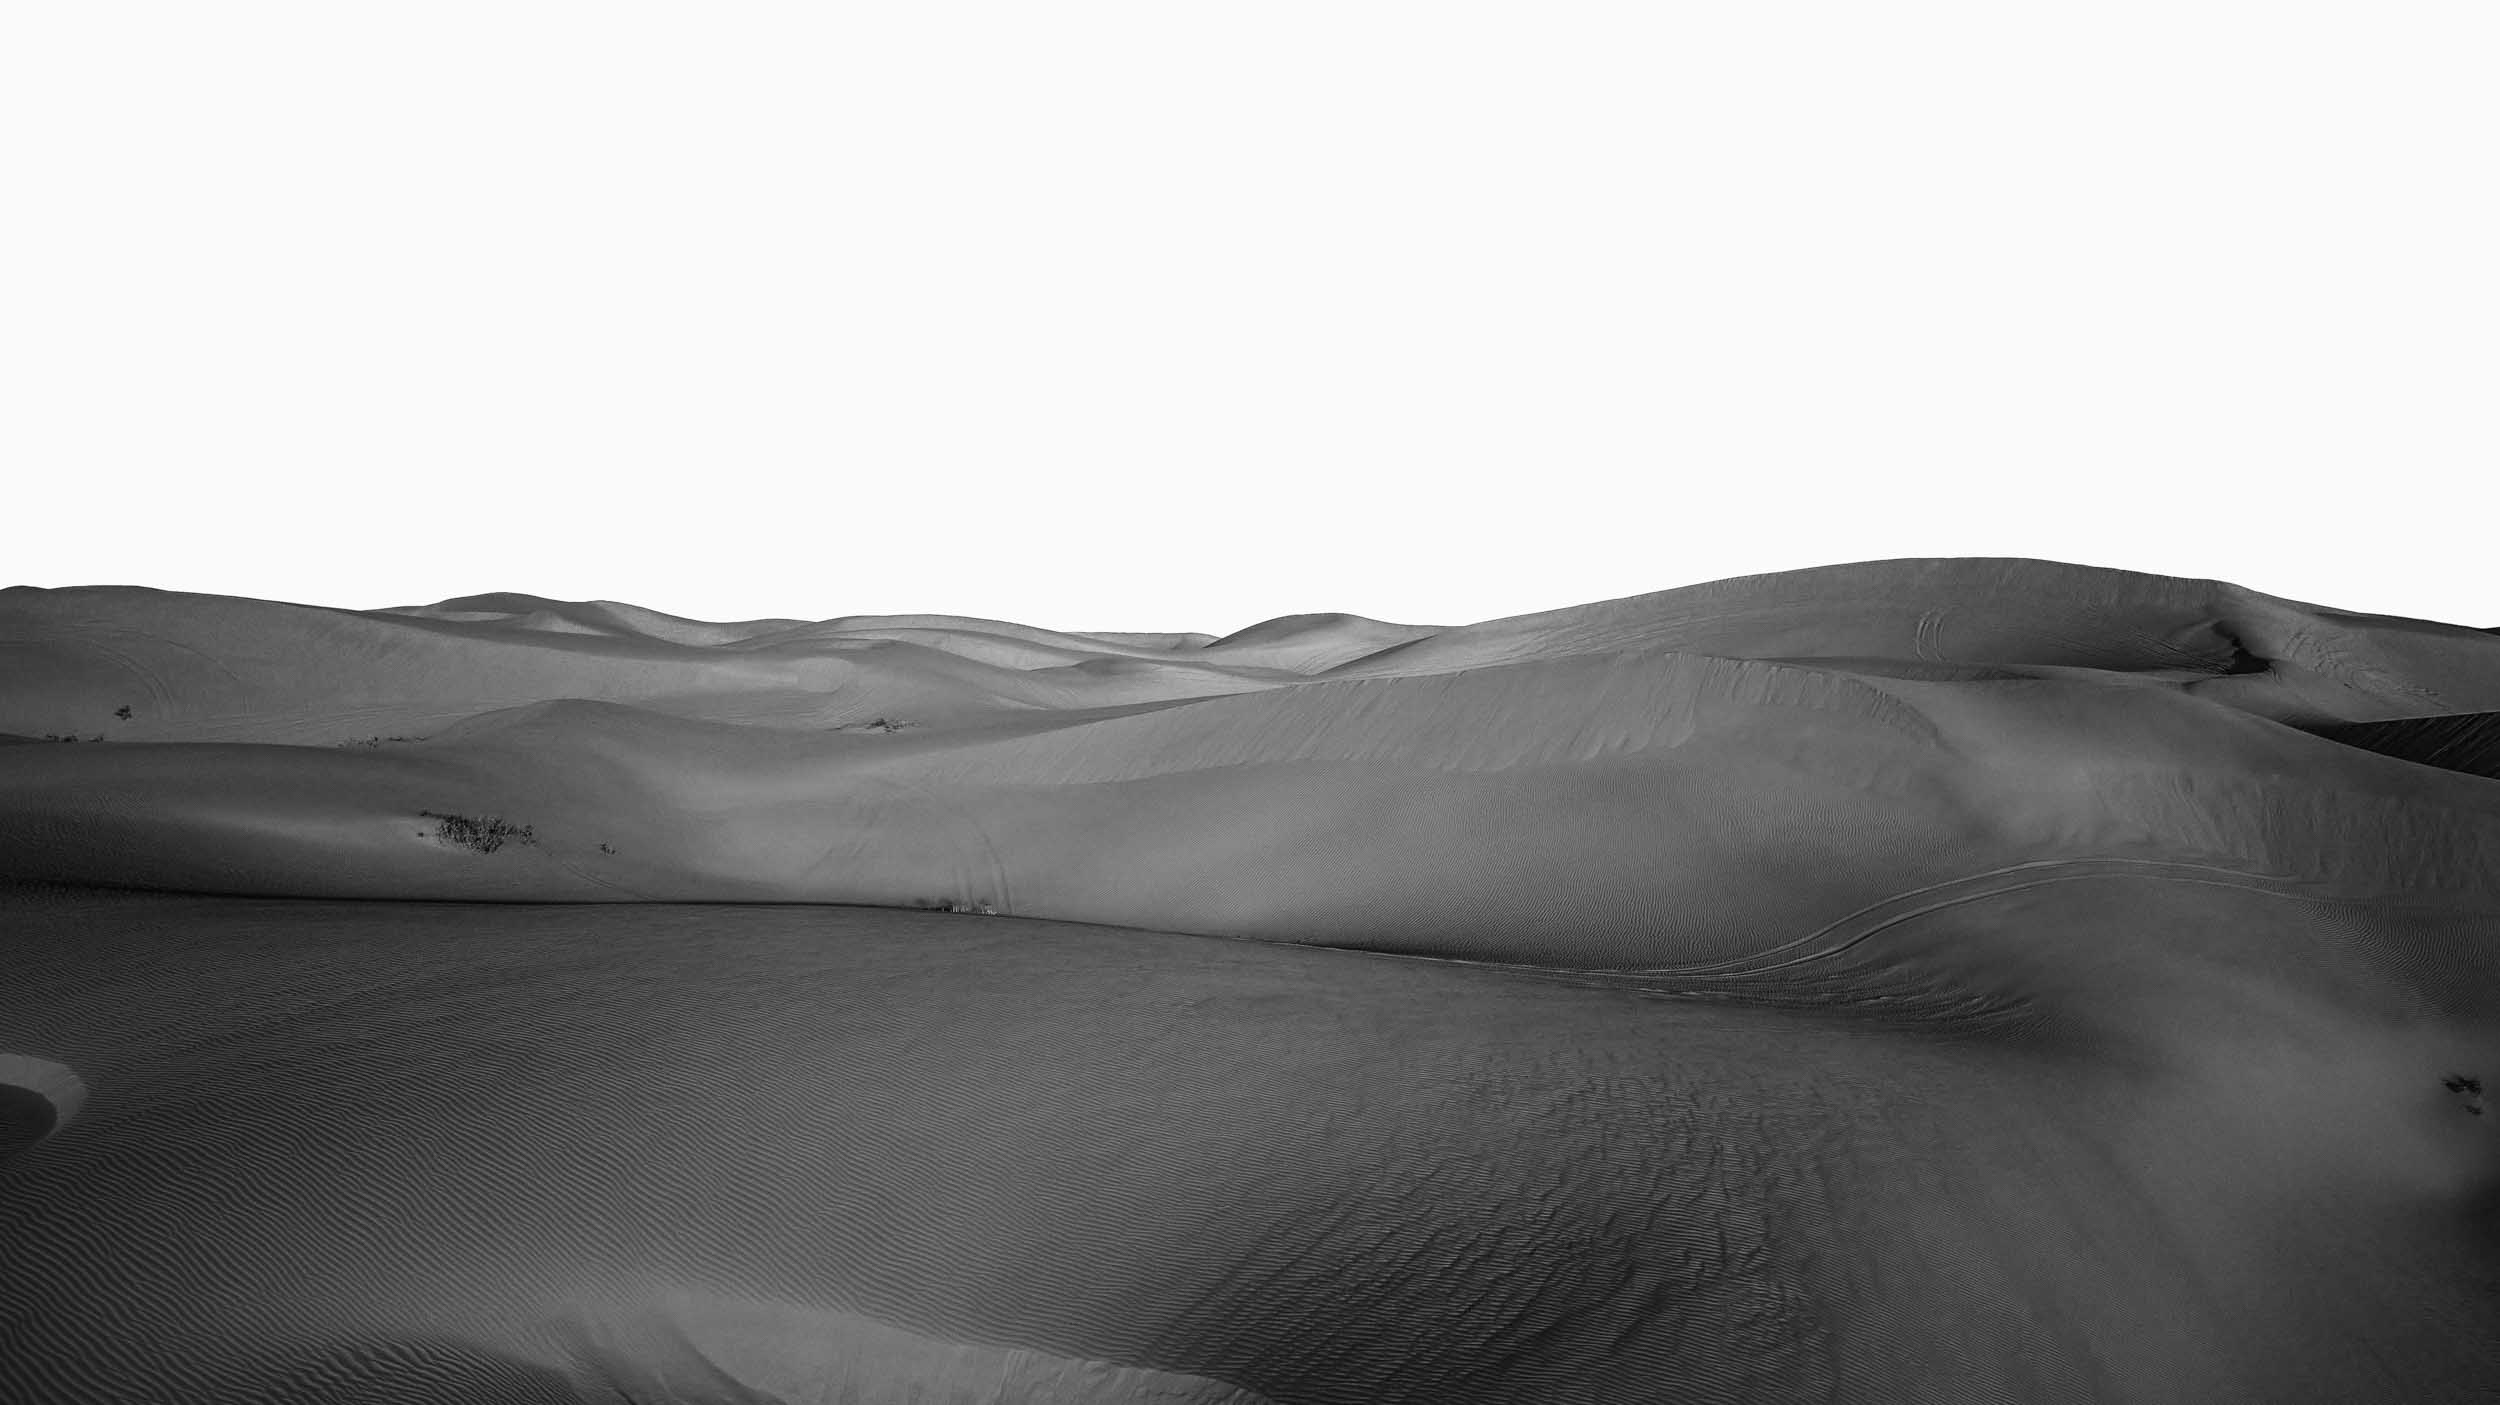 Sands Dunes In Black And White